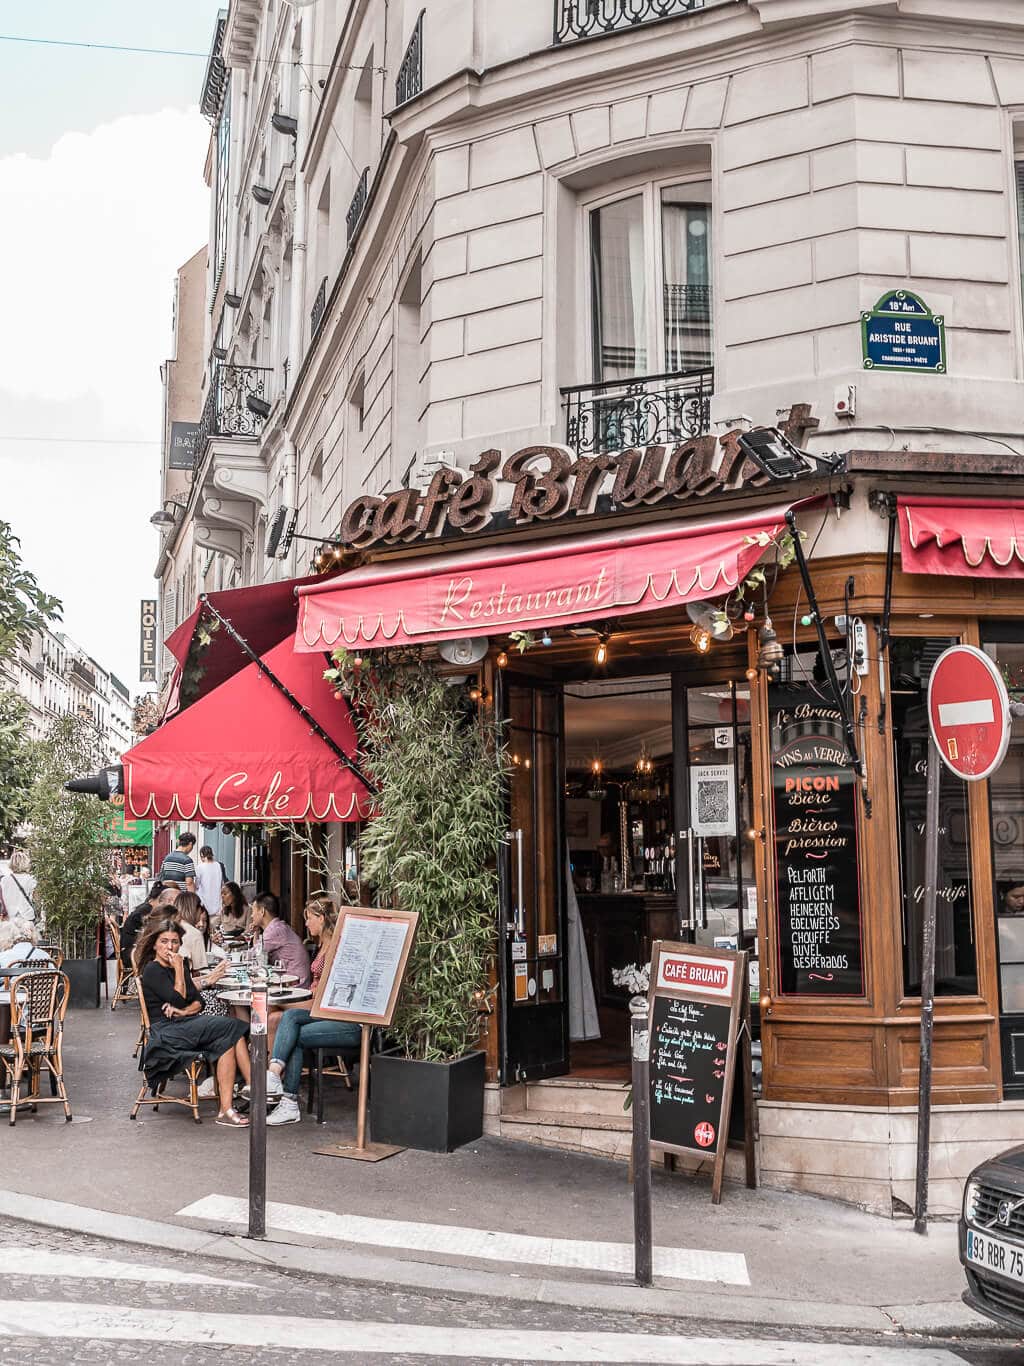 Paris Tour Guide - Things to Do in the City of Lights {5-Day Trip itinerary, including Food & Restaurant Tips, Shopping & sightseeing}